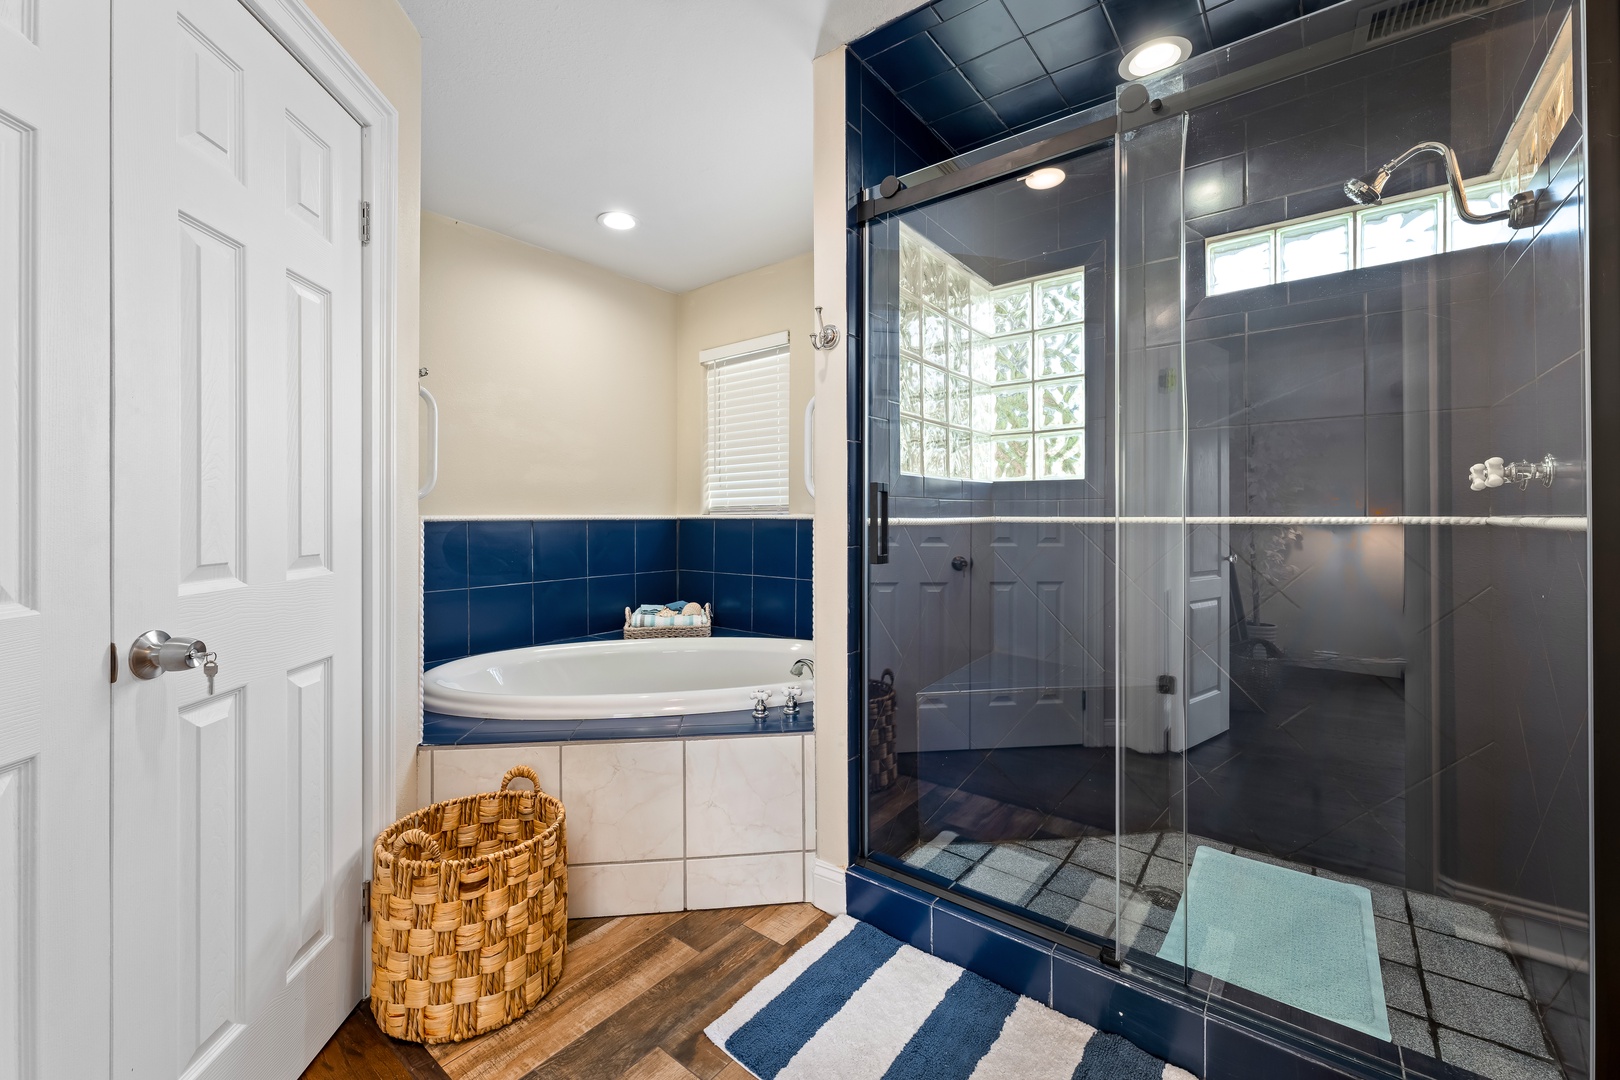 The master ensuite features a luxurious soaking tub & spa-like glass shower